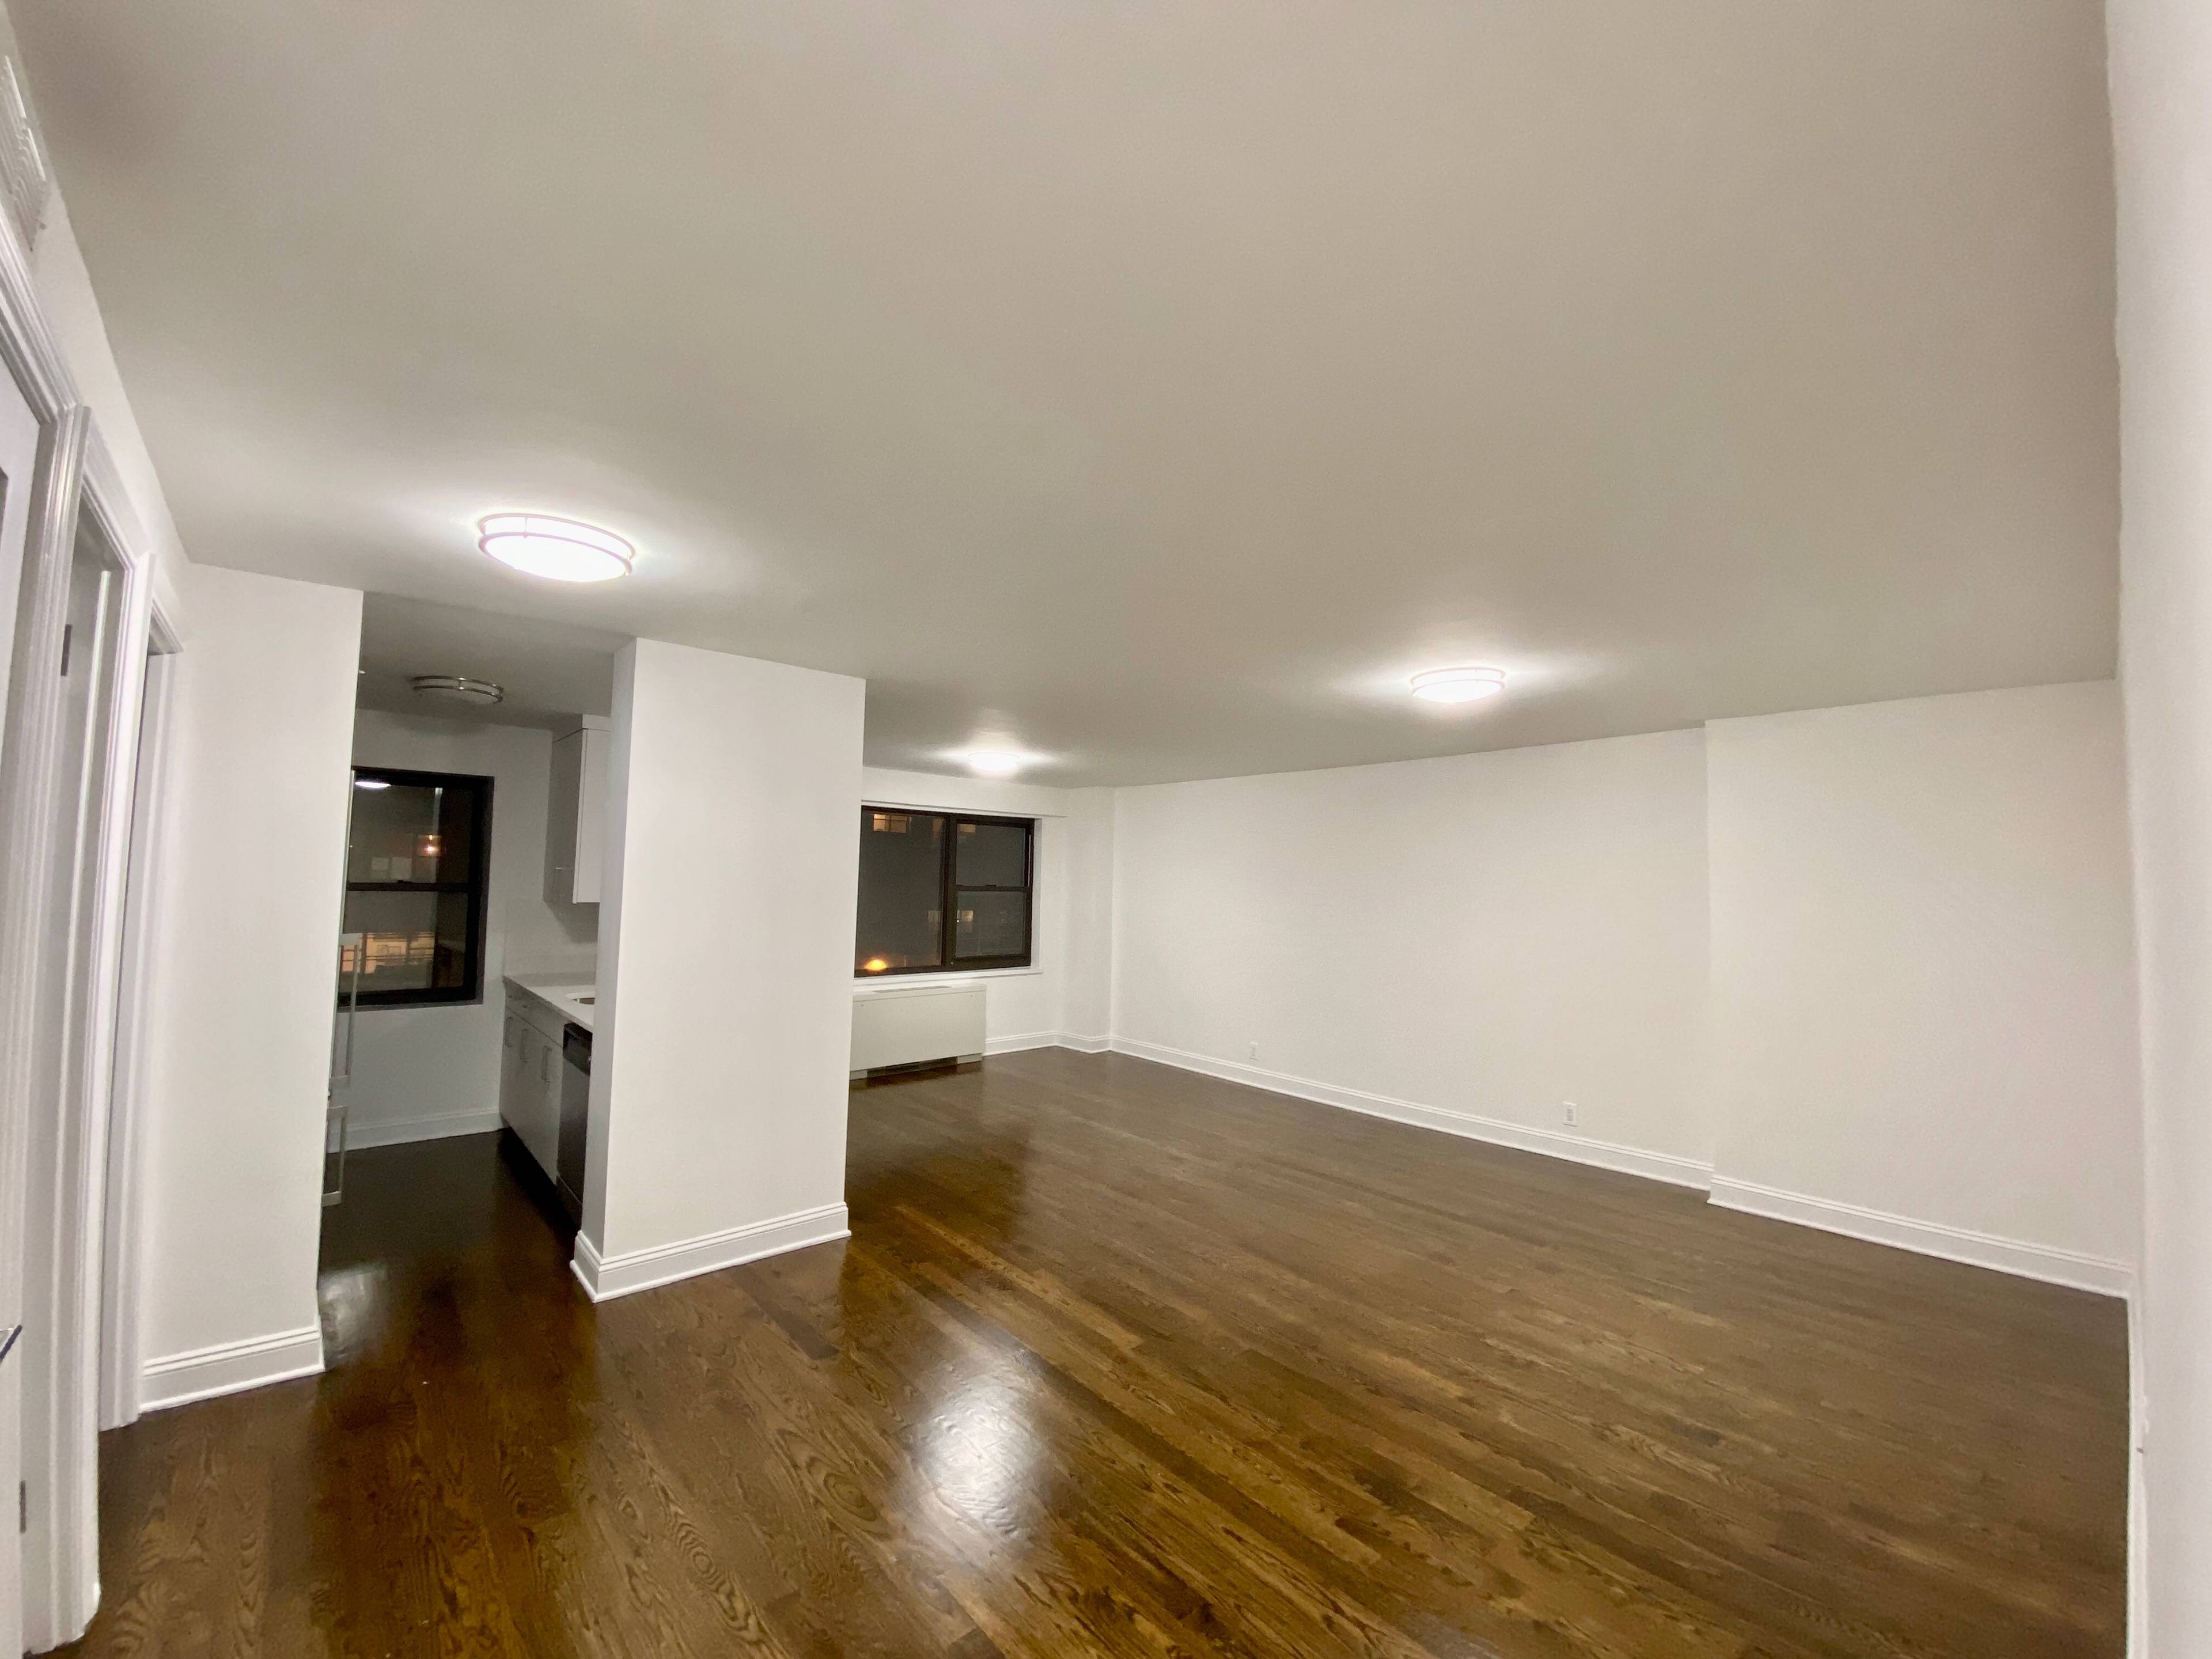 NO FEE**Prefect Covertible 3 Bedroom**Renovated**Midtown East